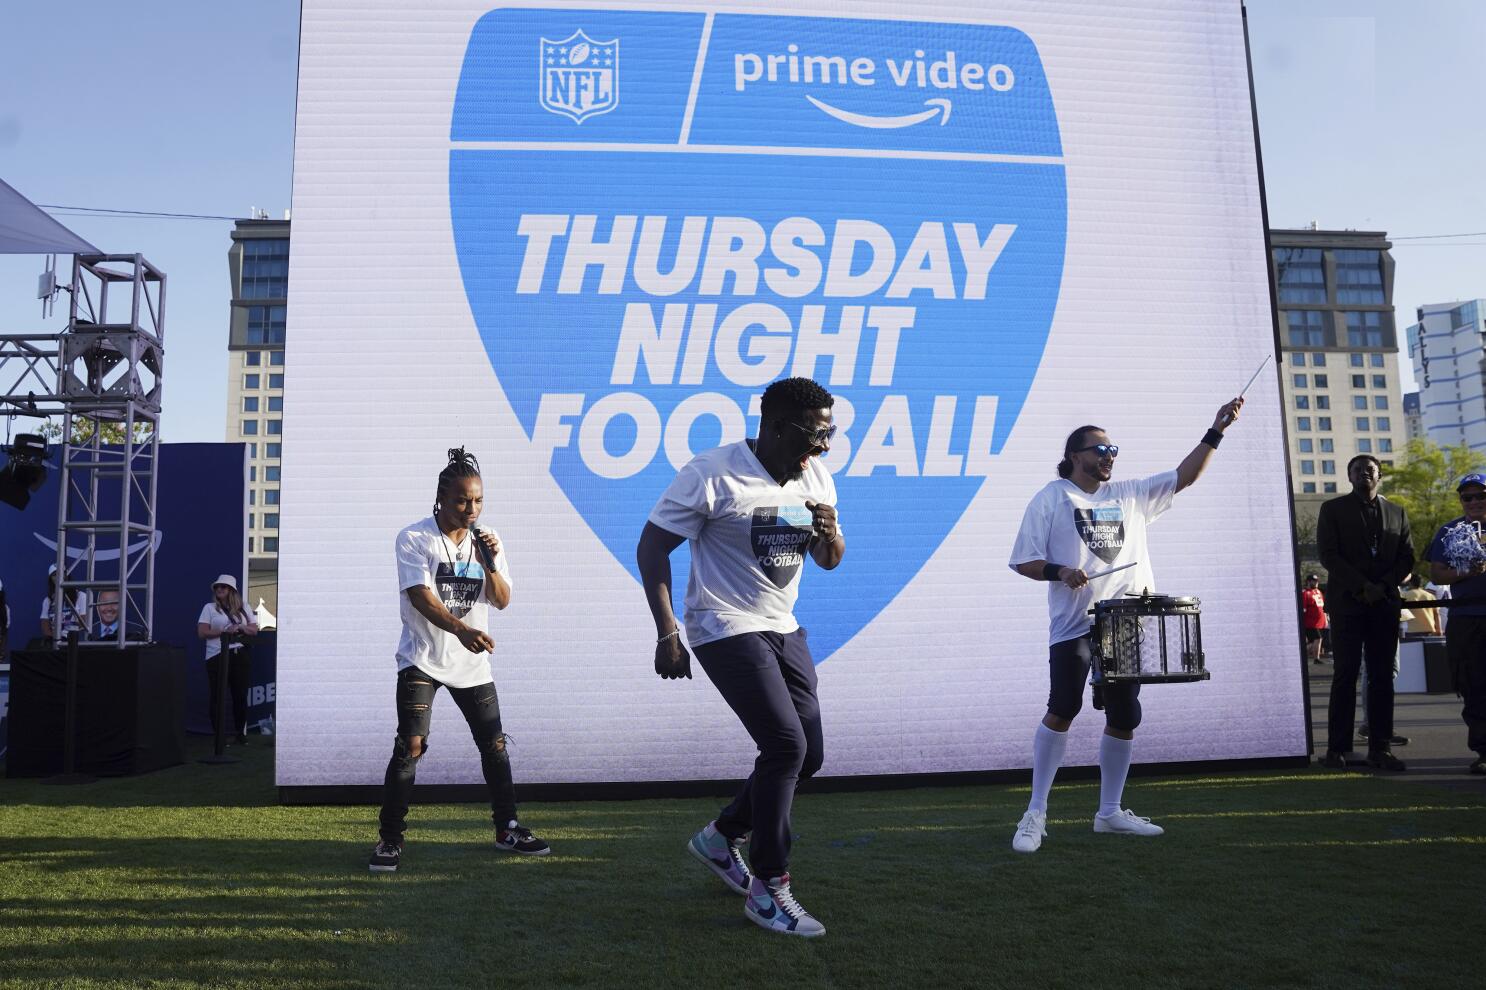 Thursday Night Football': Where to find Prime Video games - The